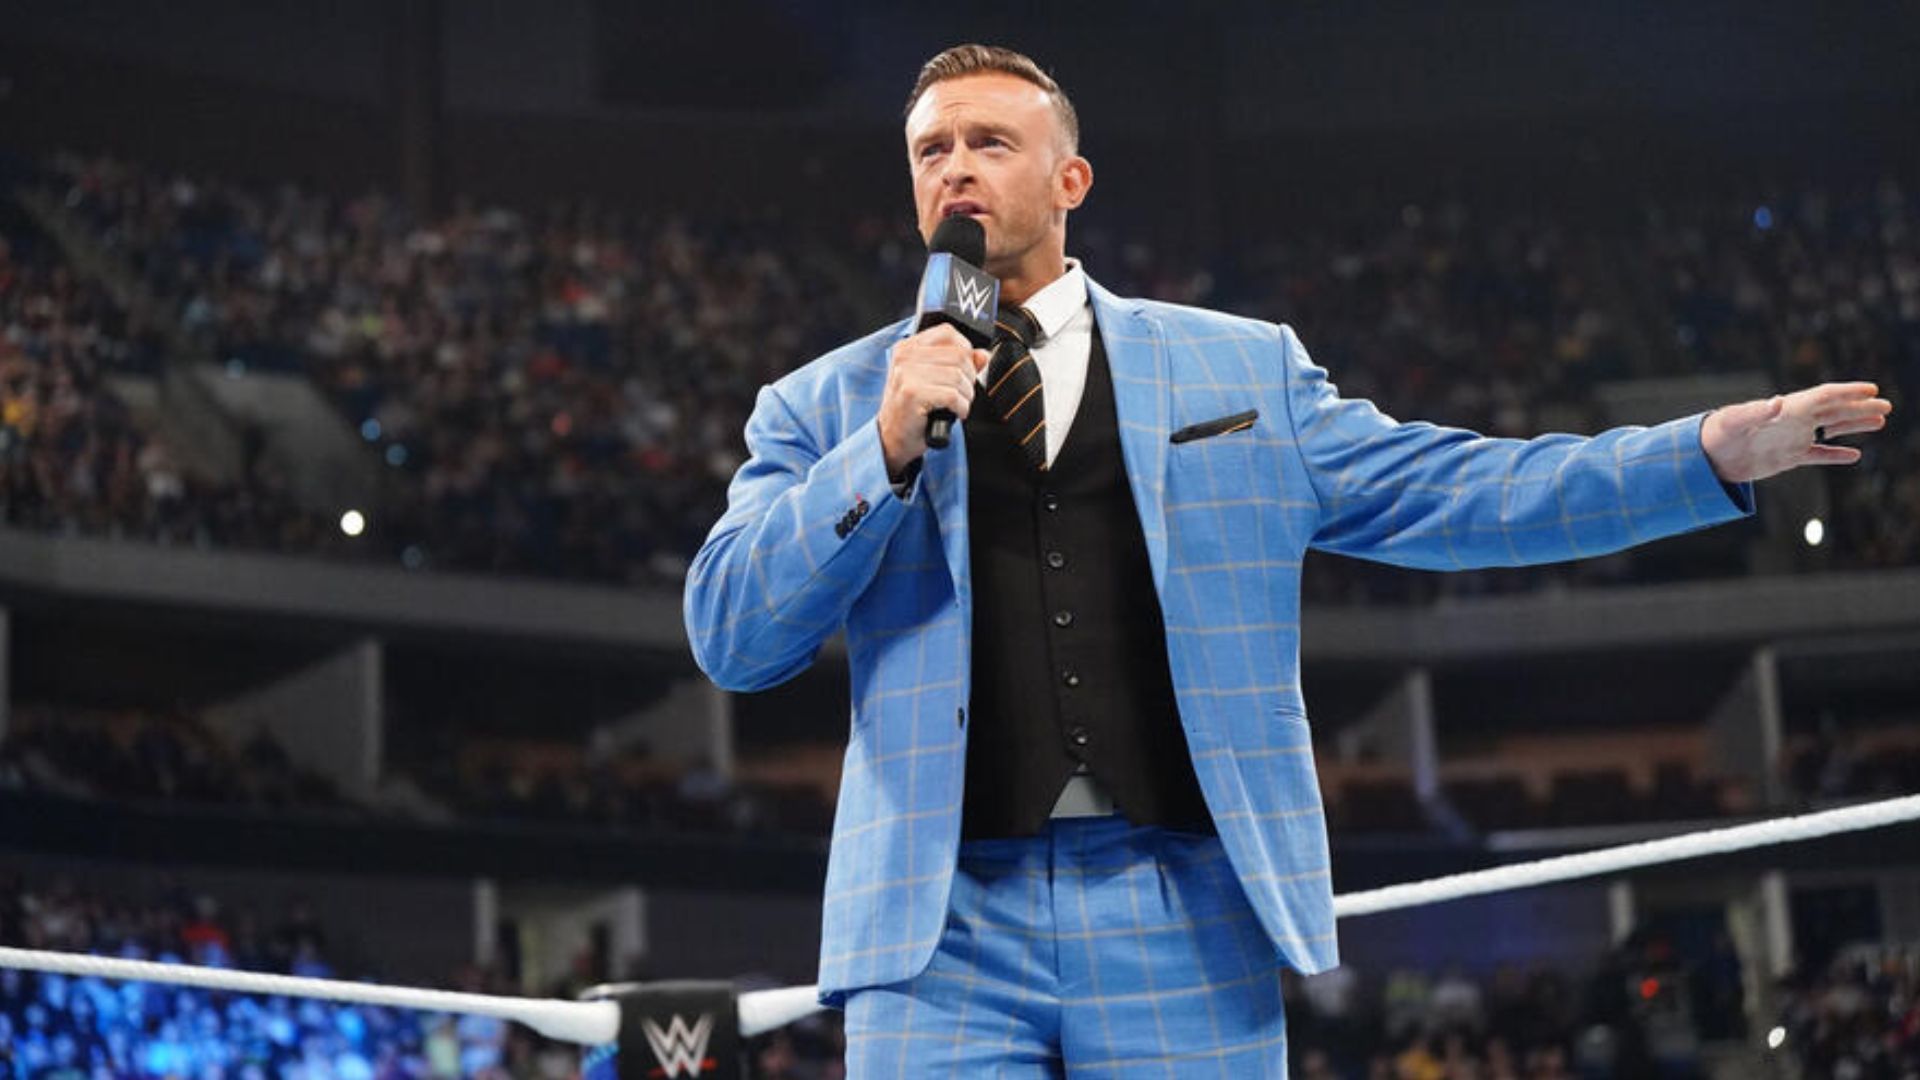 SmackDown GM Nick Aldis has been credited by fans for doing a good job